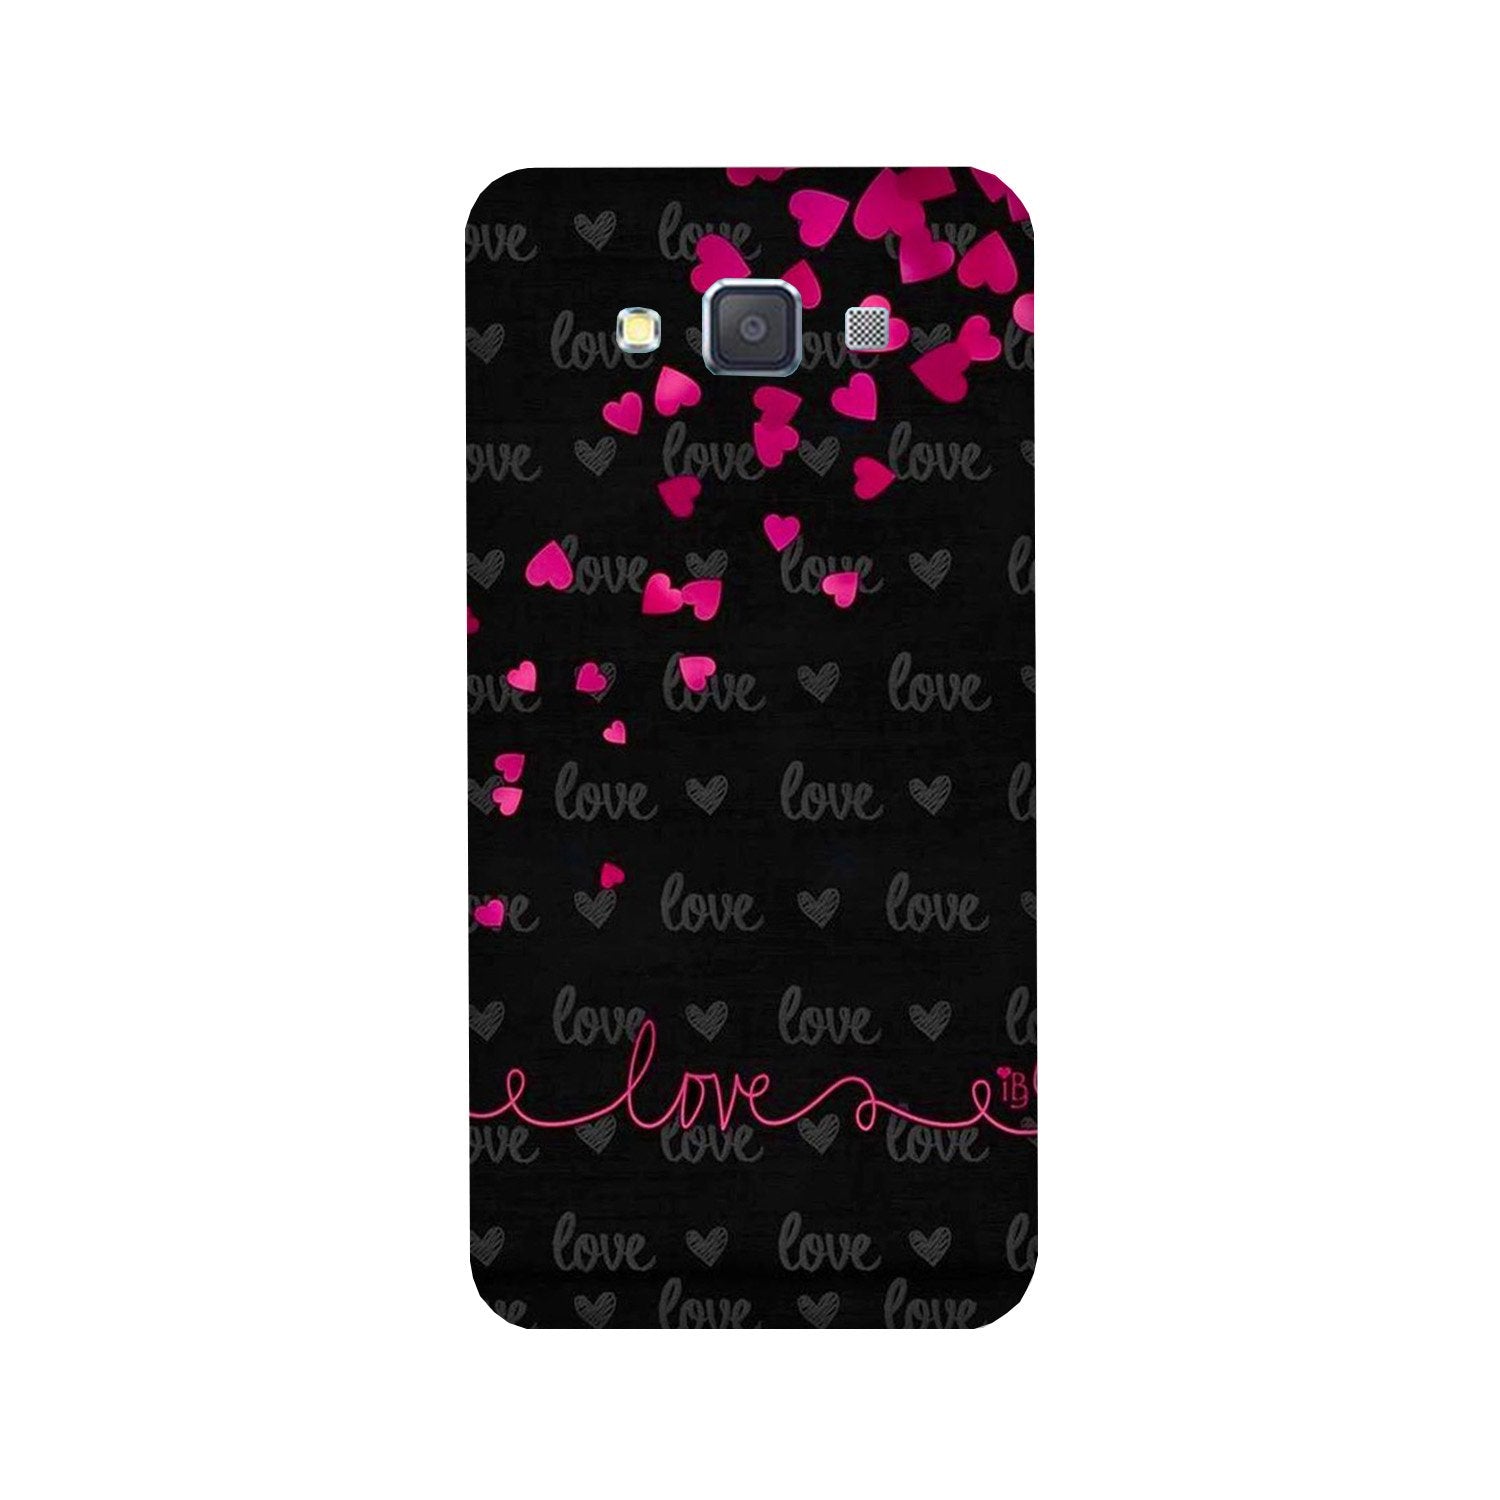 Love in Air Case for Galaxy Grand Prime